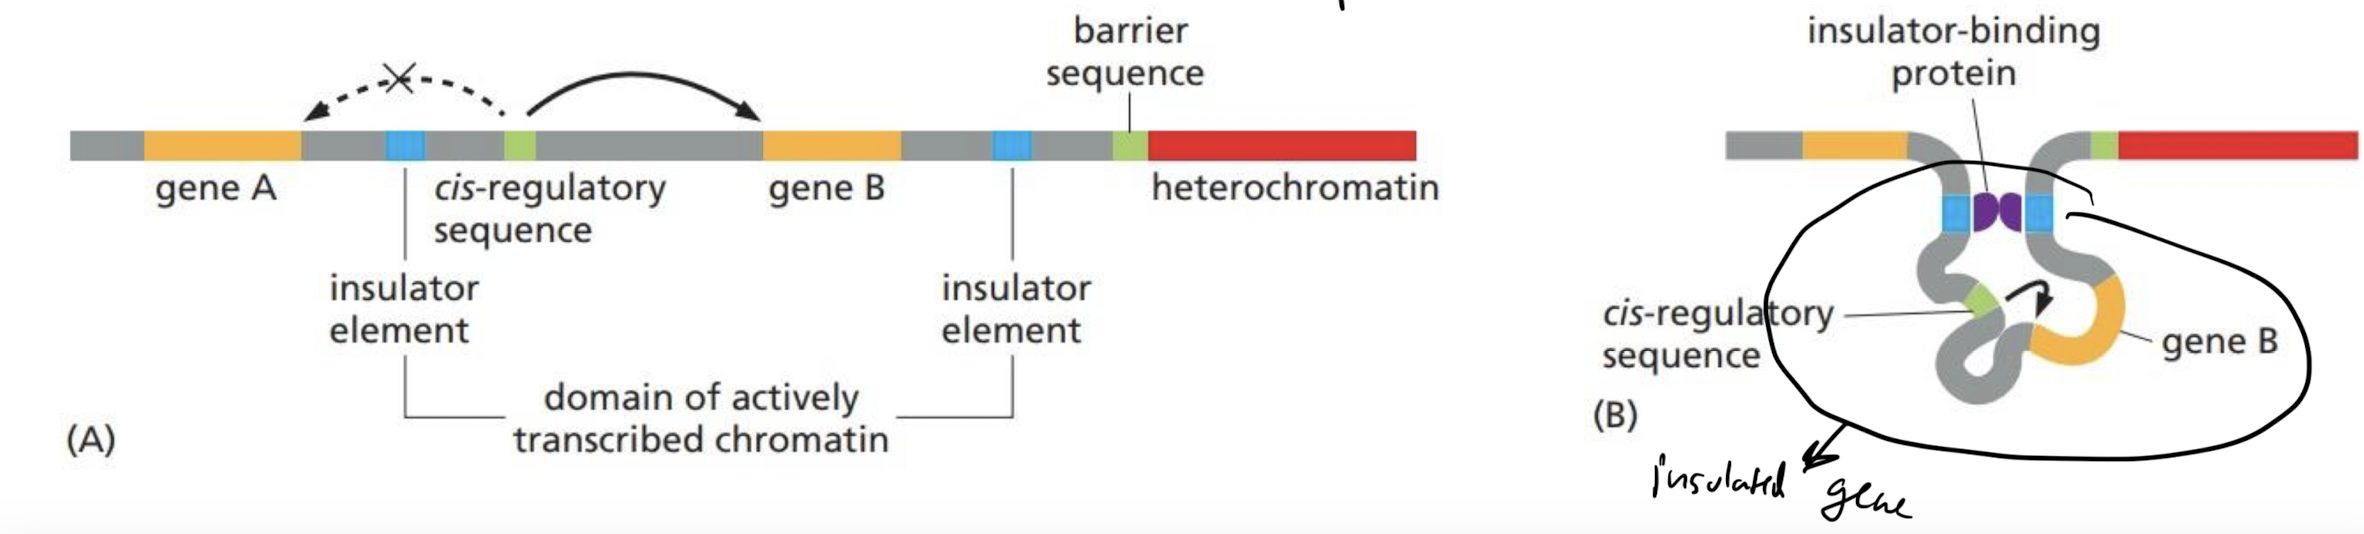 <p><strong>Insulators</strong></p><ul><li><p>elements on either sides of the cis-regulatory sequence and its gene</p></li><li><p>bind together to form a loop and stops interactions with other genes</p></li></ul>